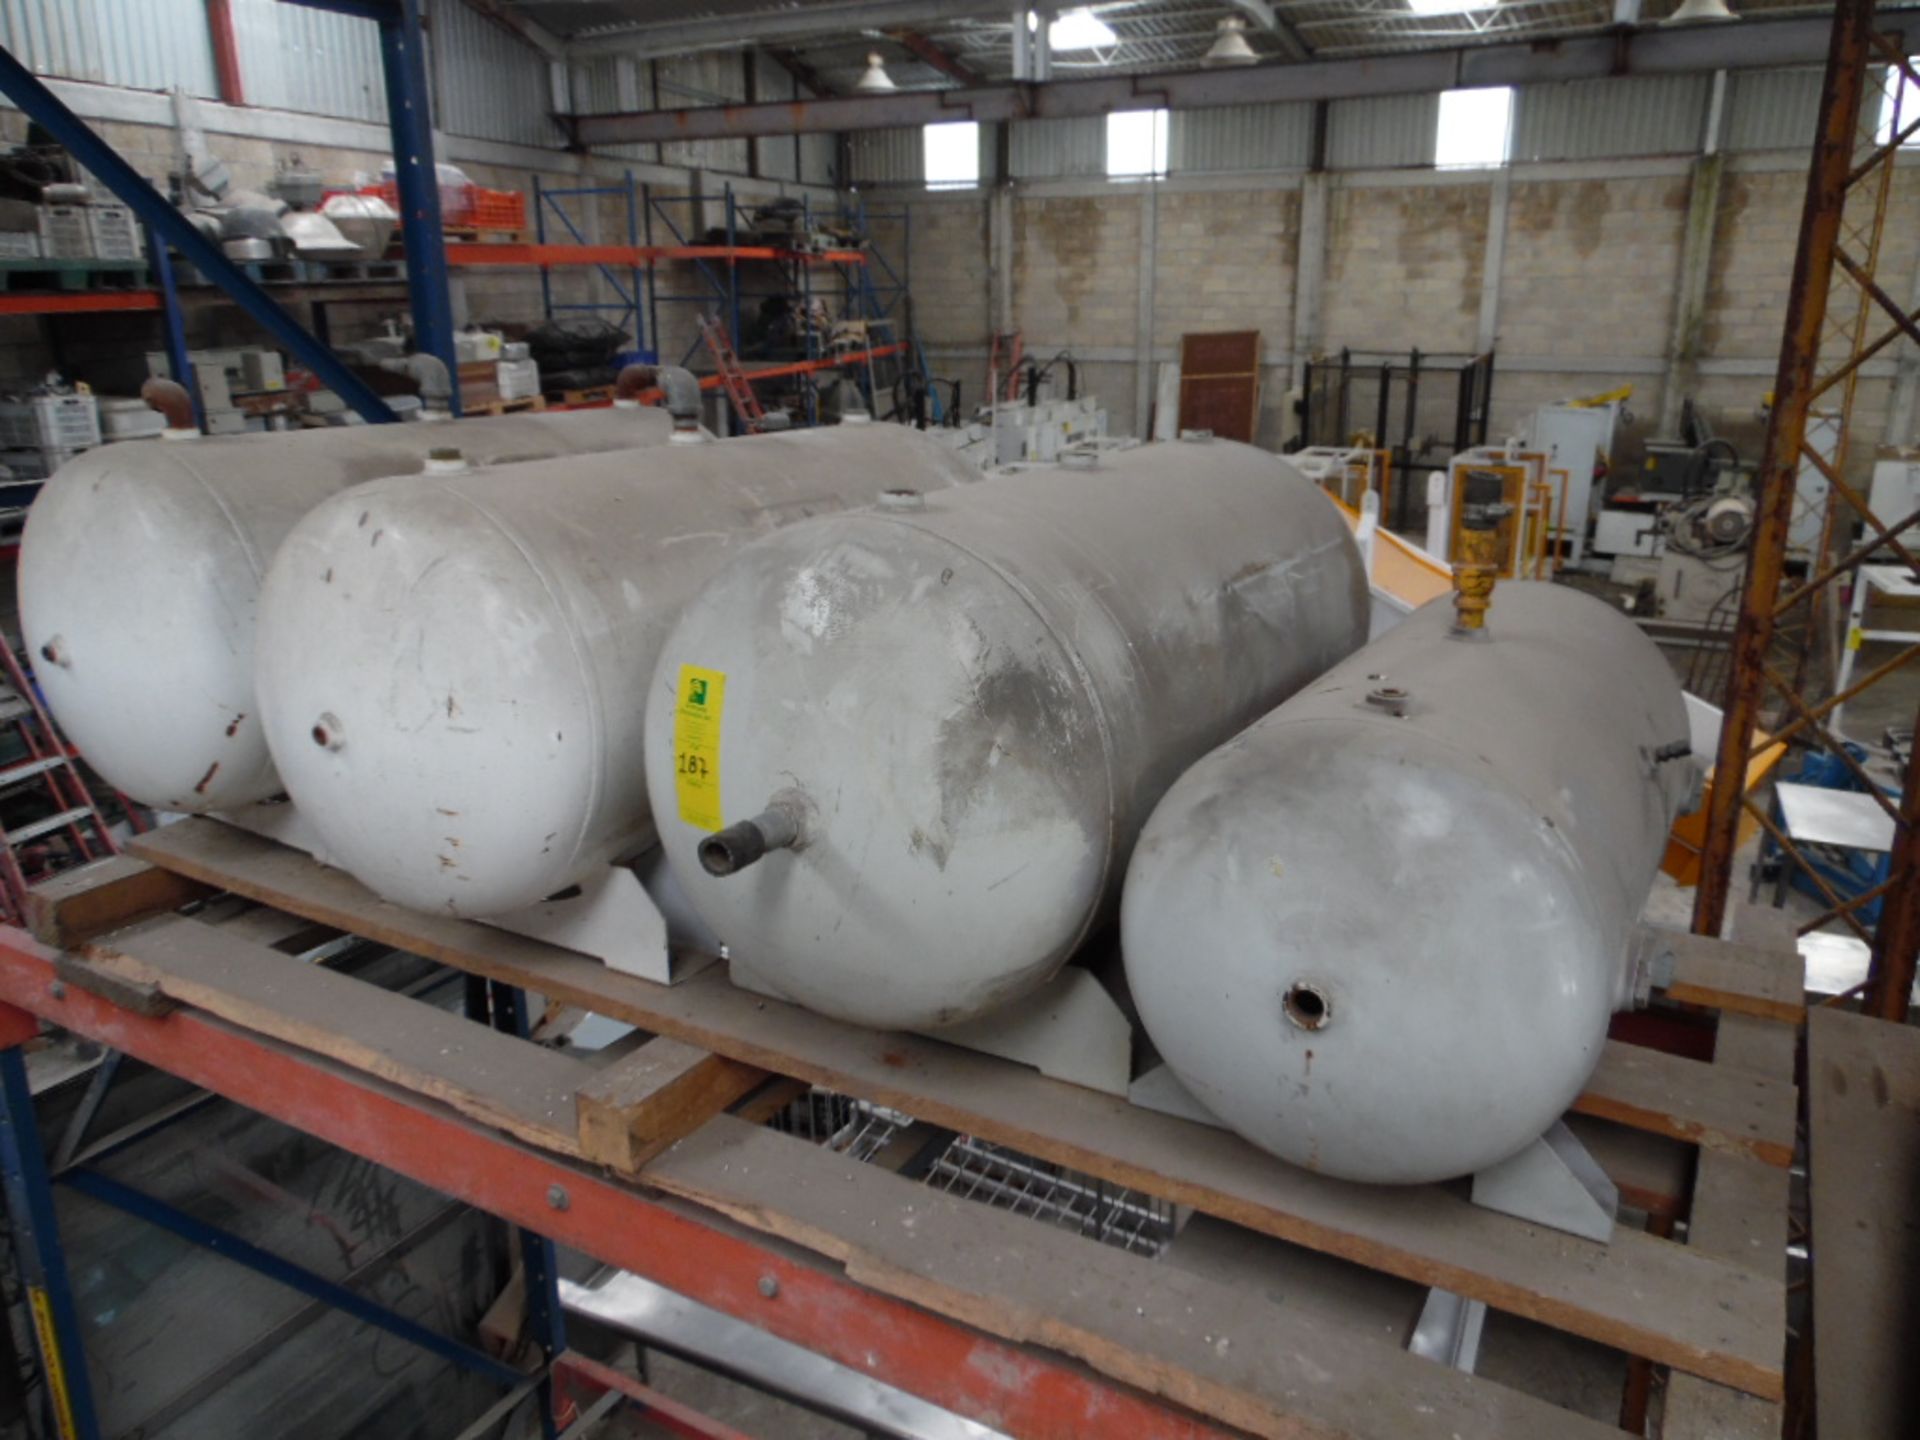 4 tanques para aire comprimido (4 tanks fot compressed air). - Image 2 of 2